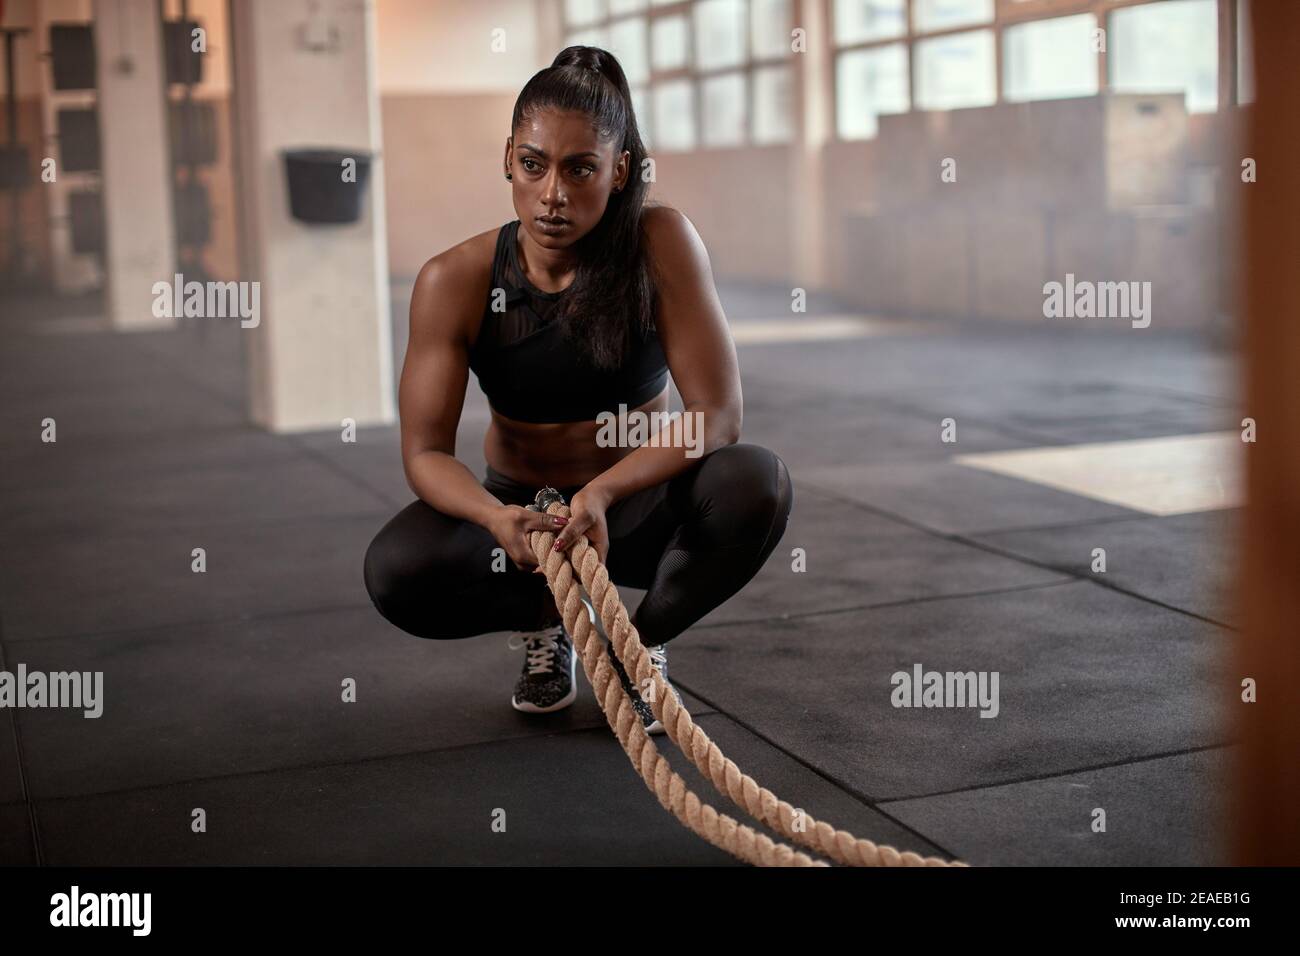 Fit young Indian woman in sportswear crouching on a gym floor and looking exhausted after a battle rope workout session Stock Photo